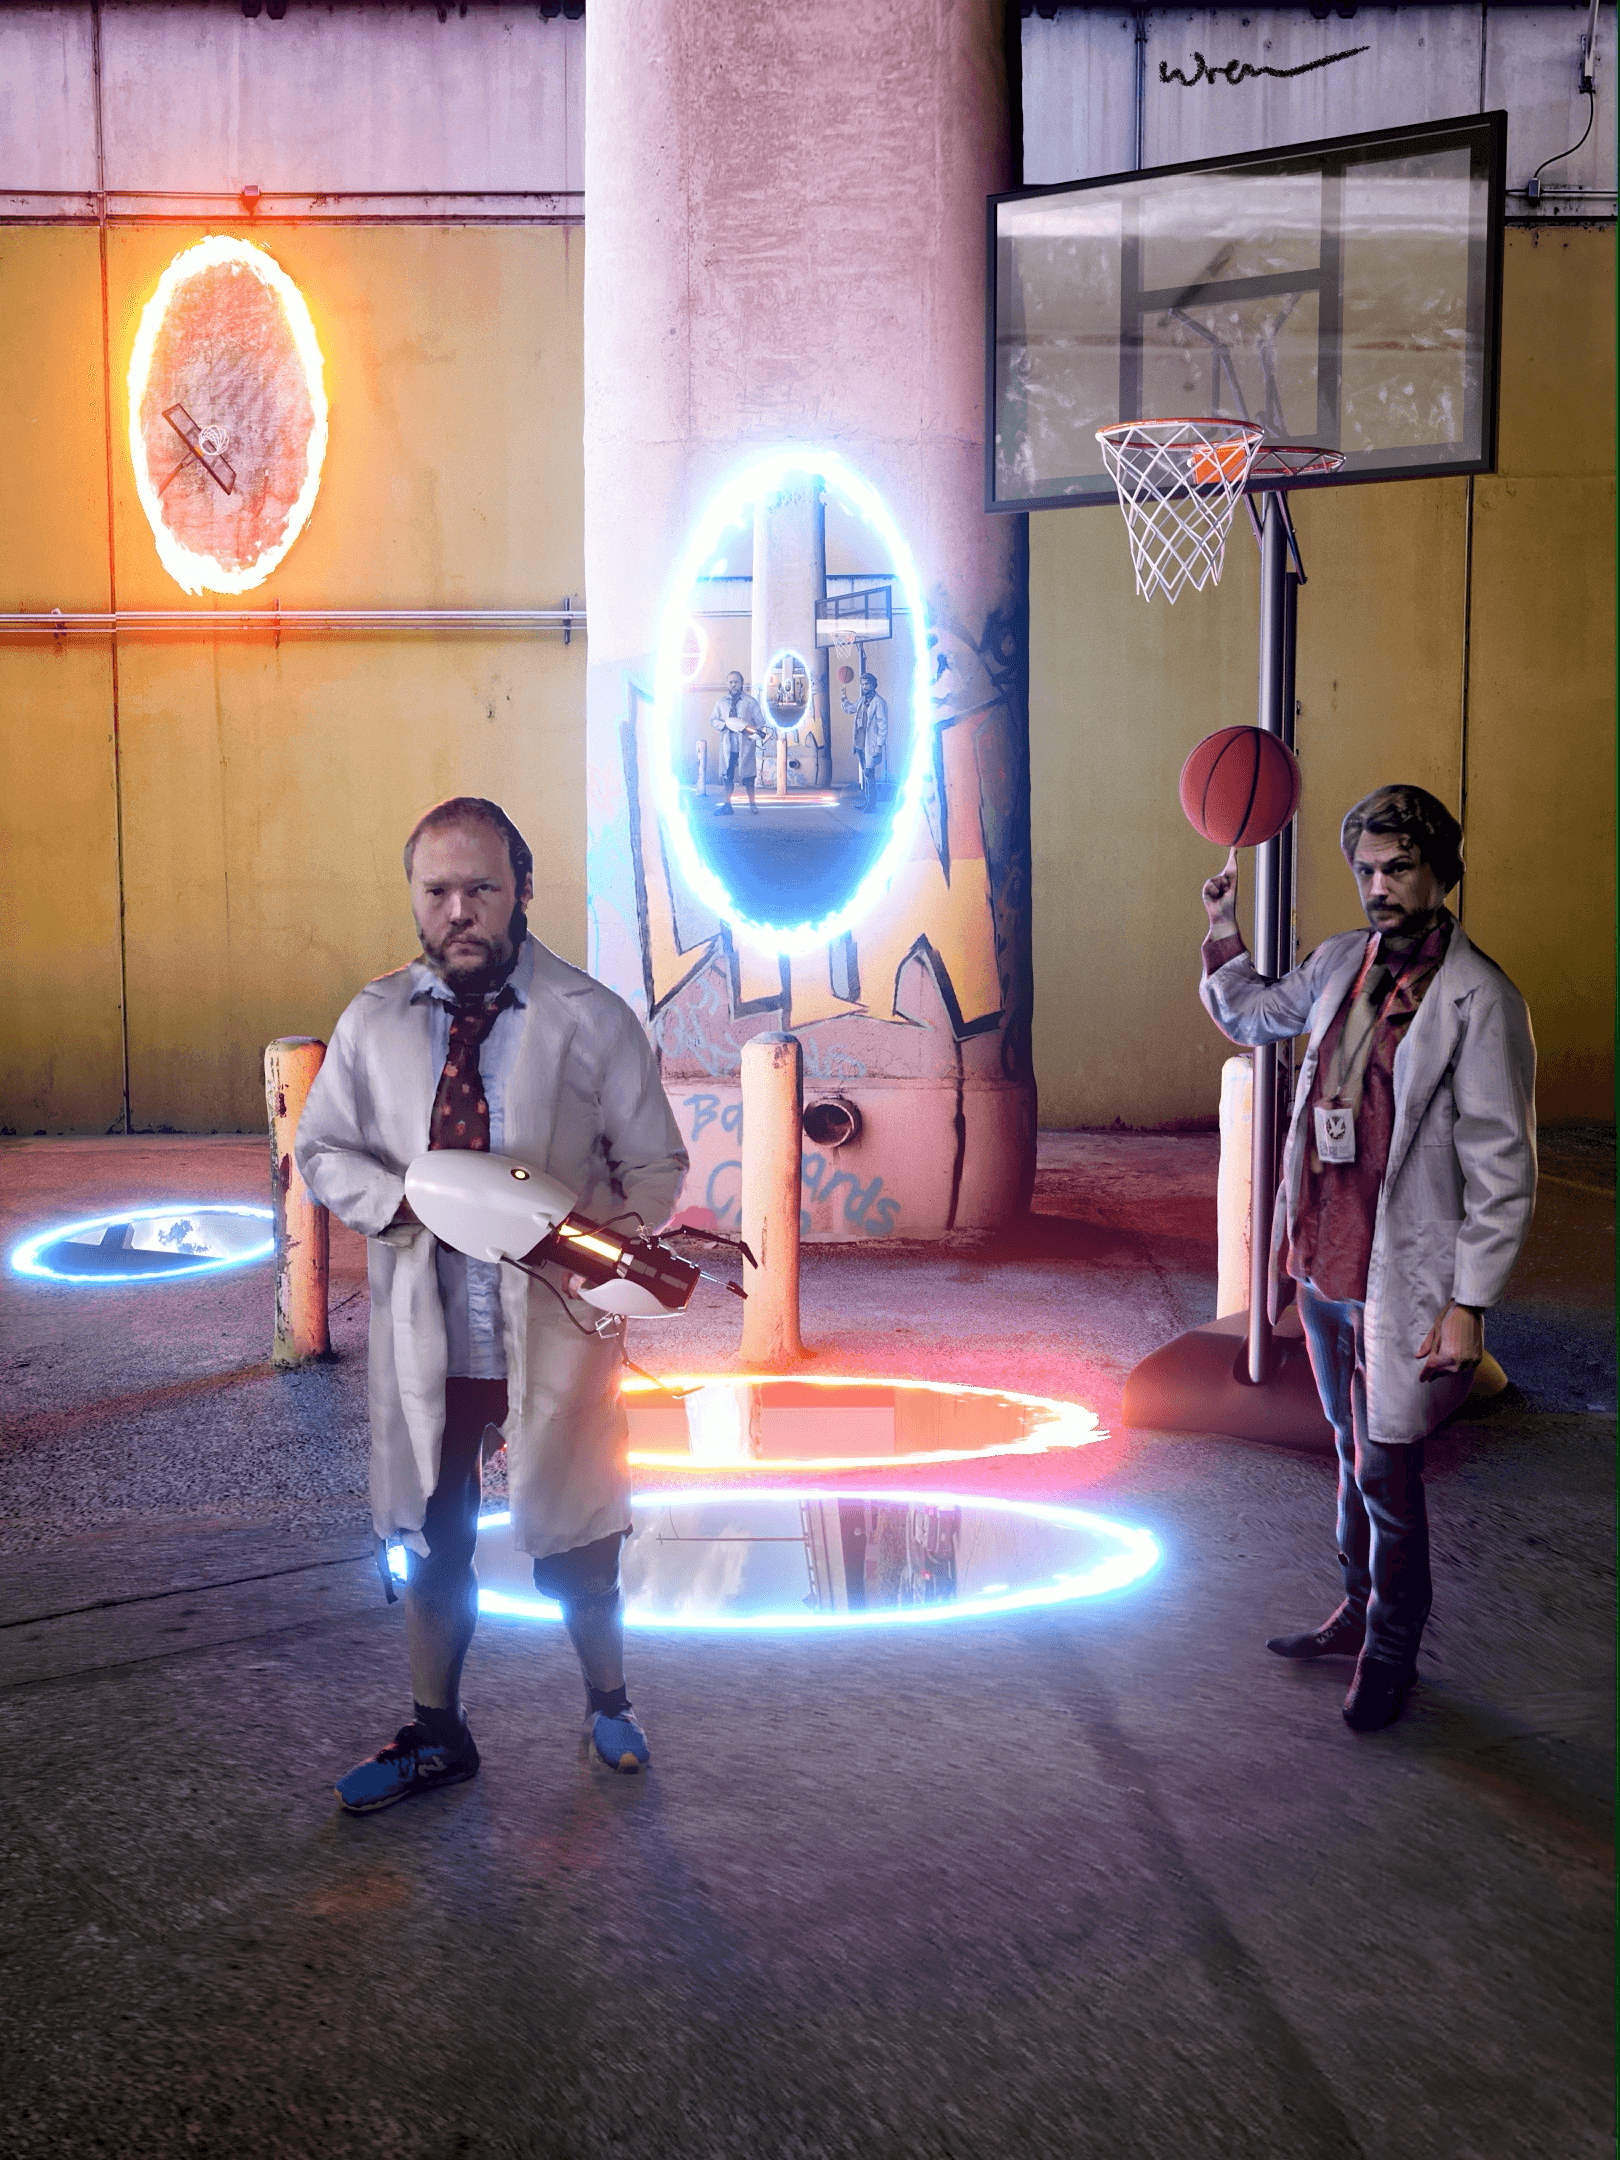 Alley-oop! Inspired by Portal Trick Shots (2014)